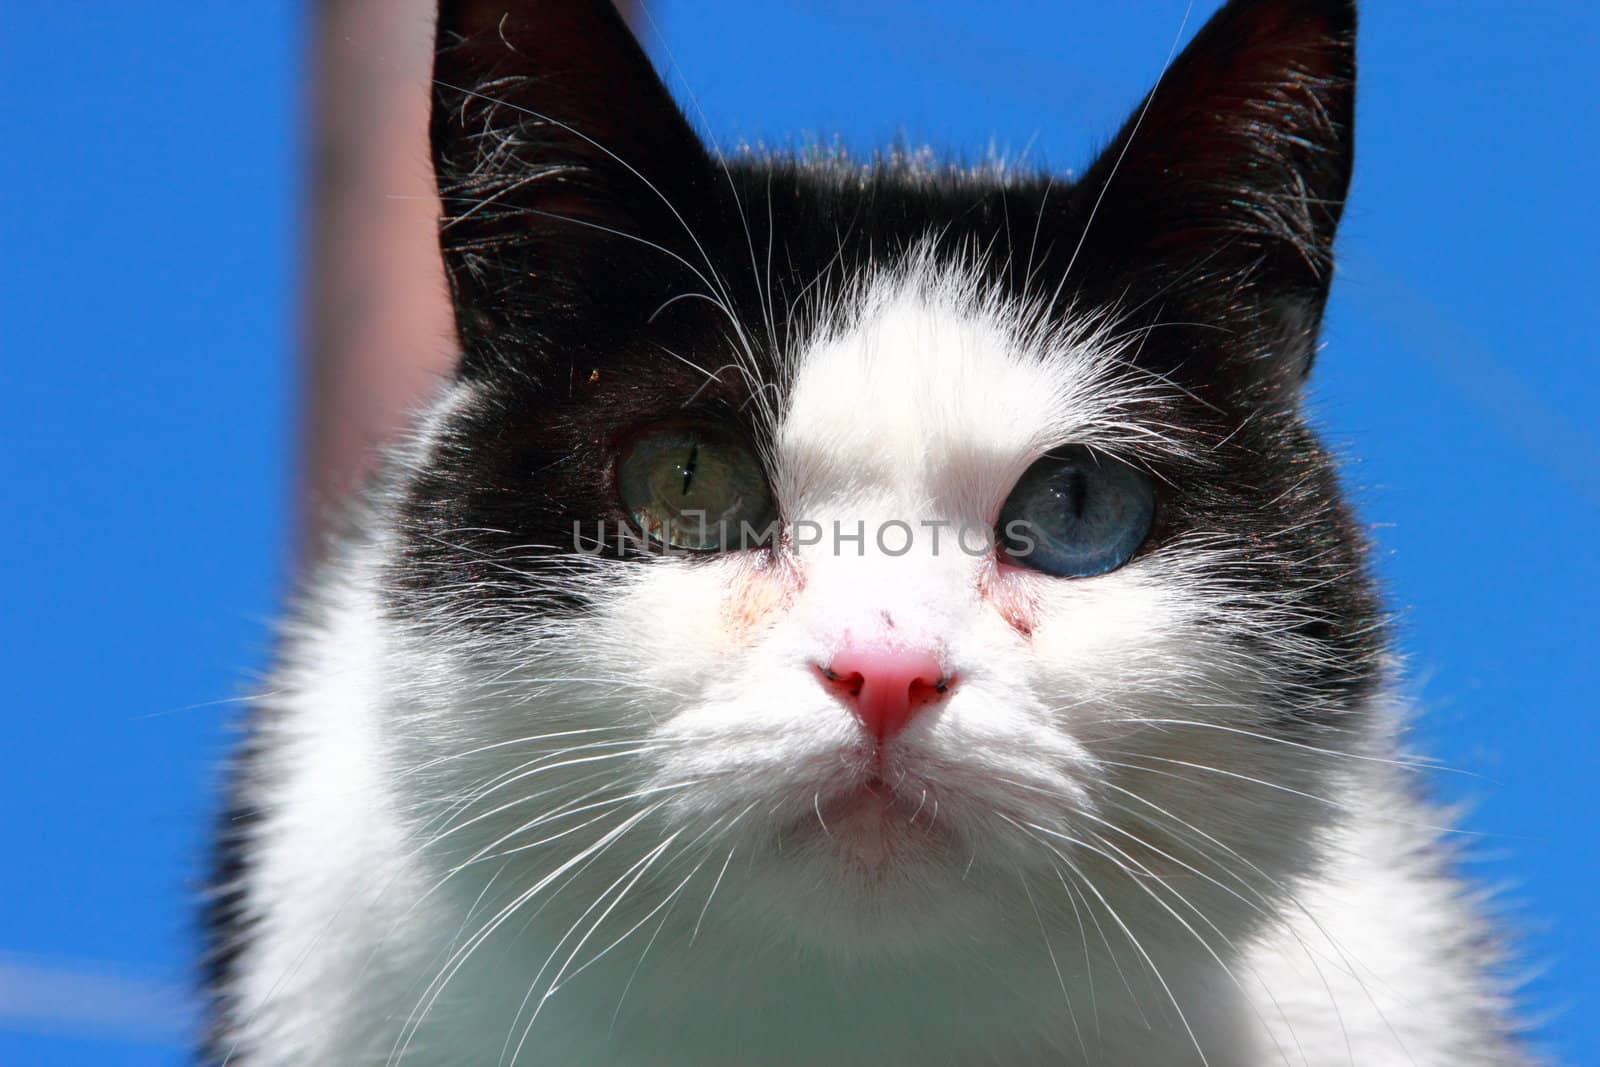 cat with different eyes, black and white